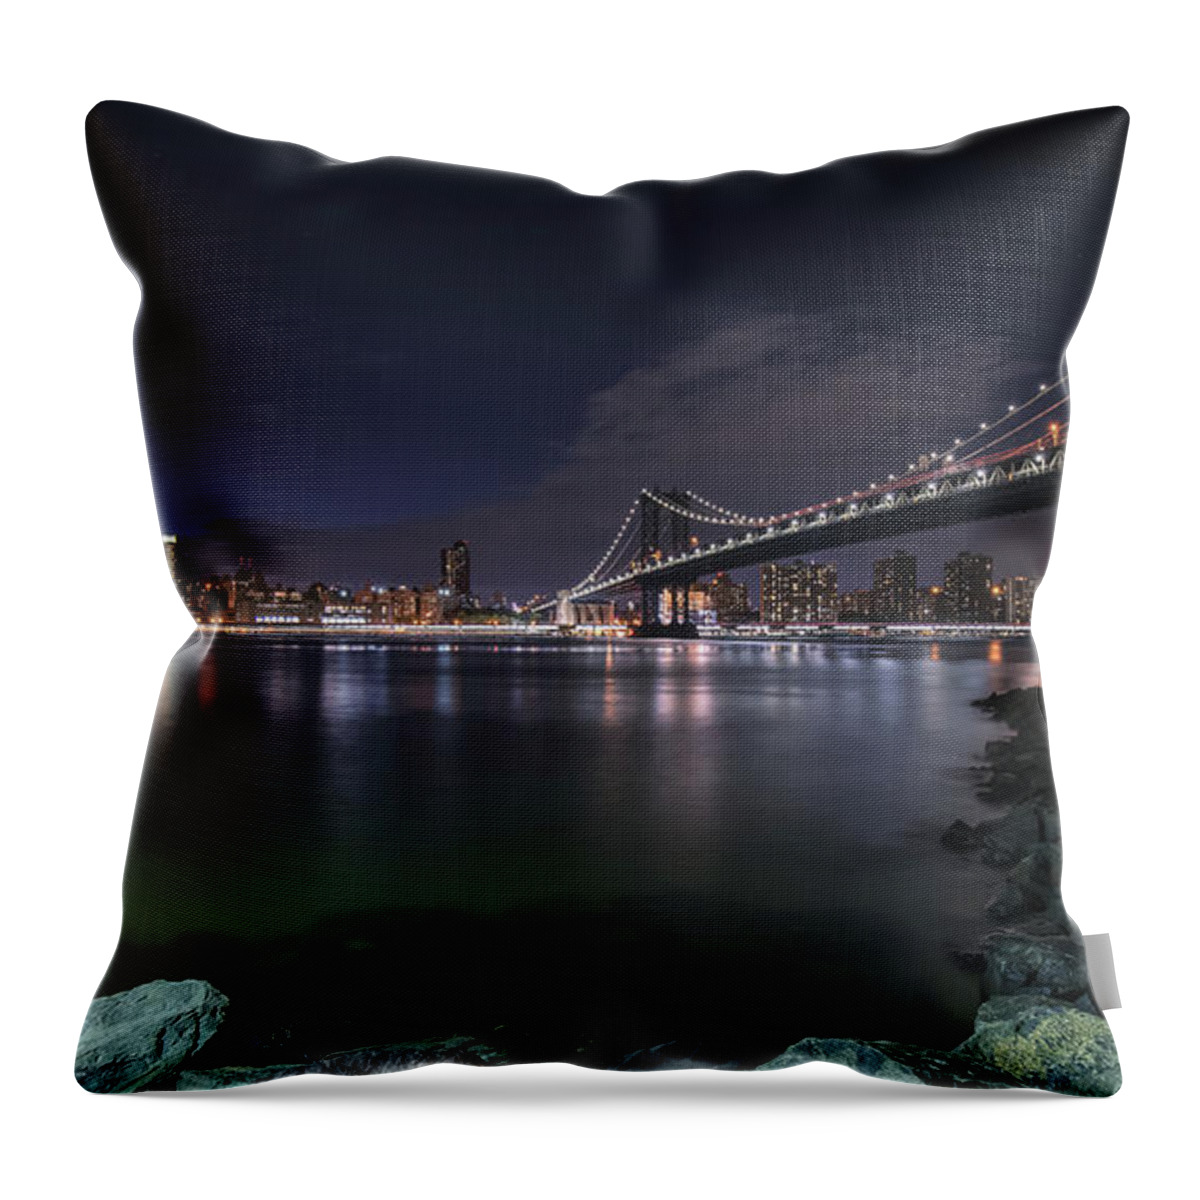 New York City Throw Pillow featuring the photograph Manhattan Bridge Twinkles at Night by Alissa Beth Photography